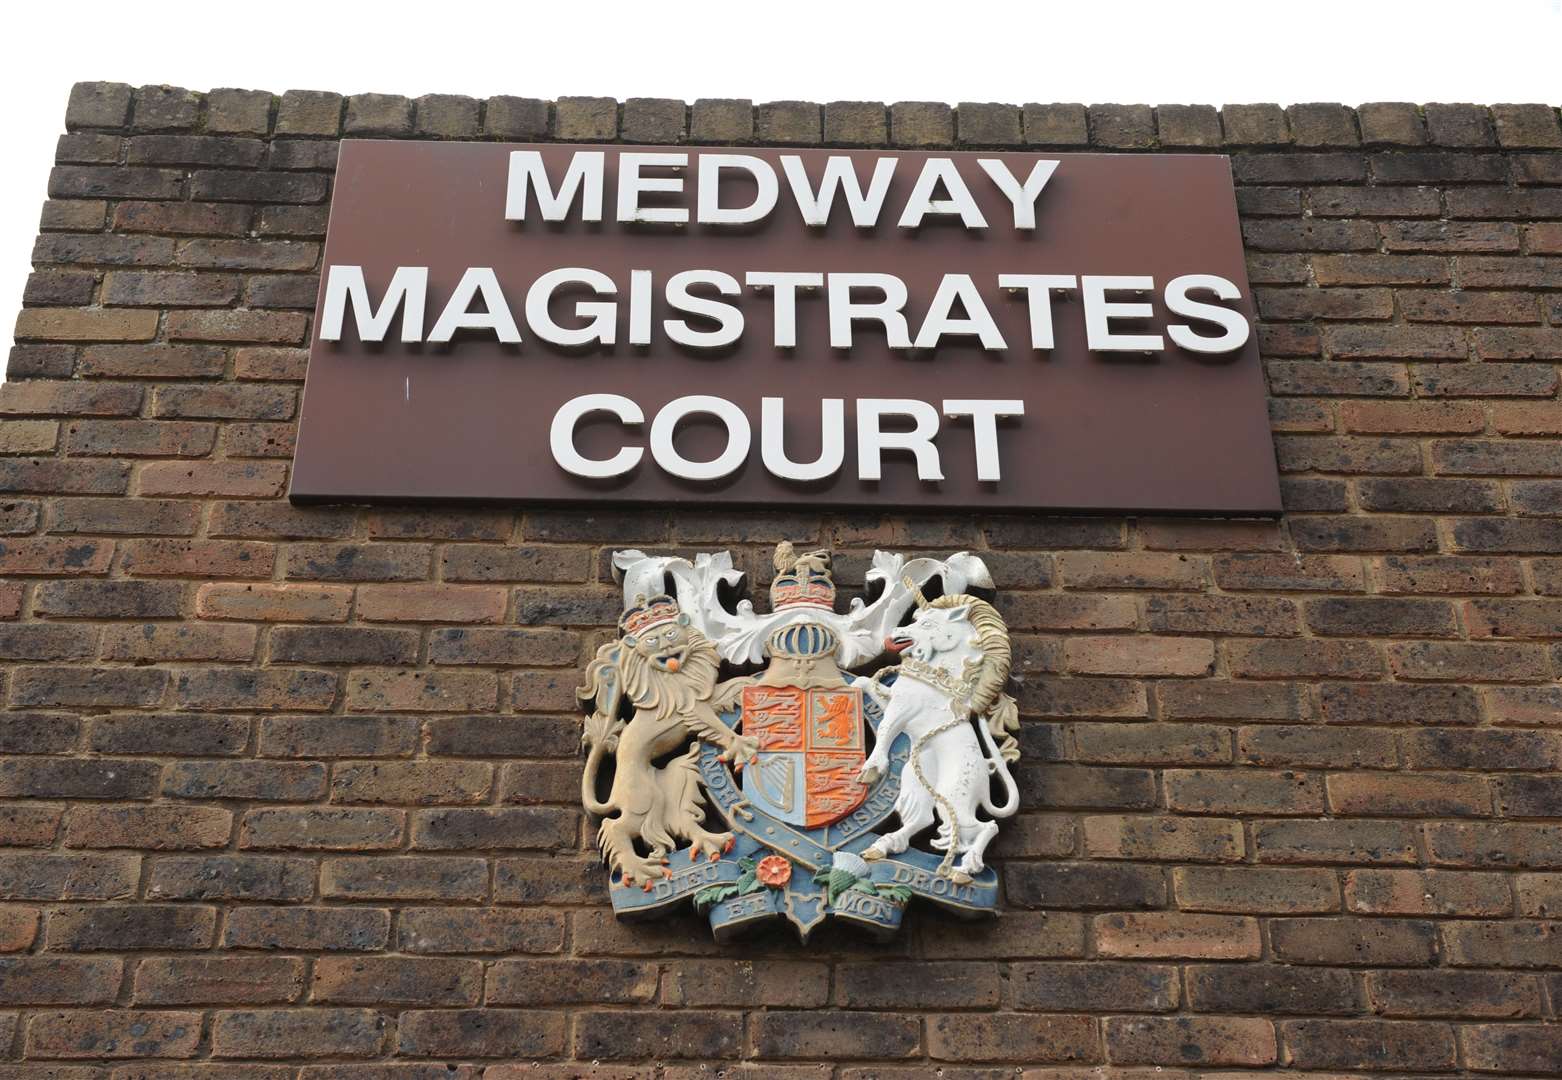 Terence Standage admitted the offences when he appeared at Medway Magistrates' Court